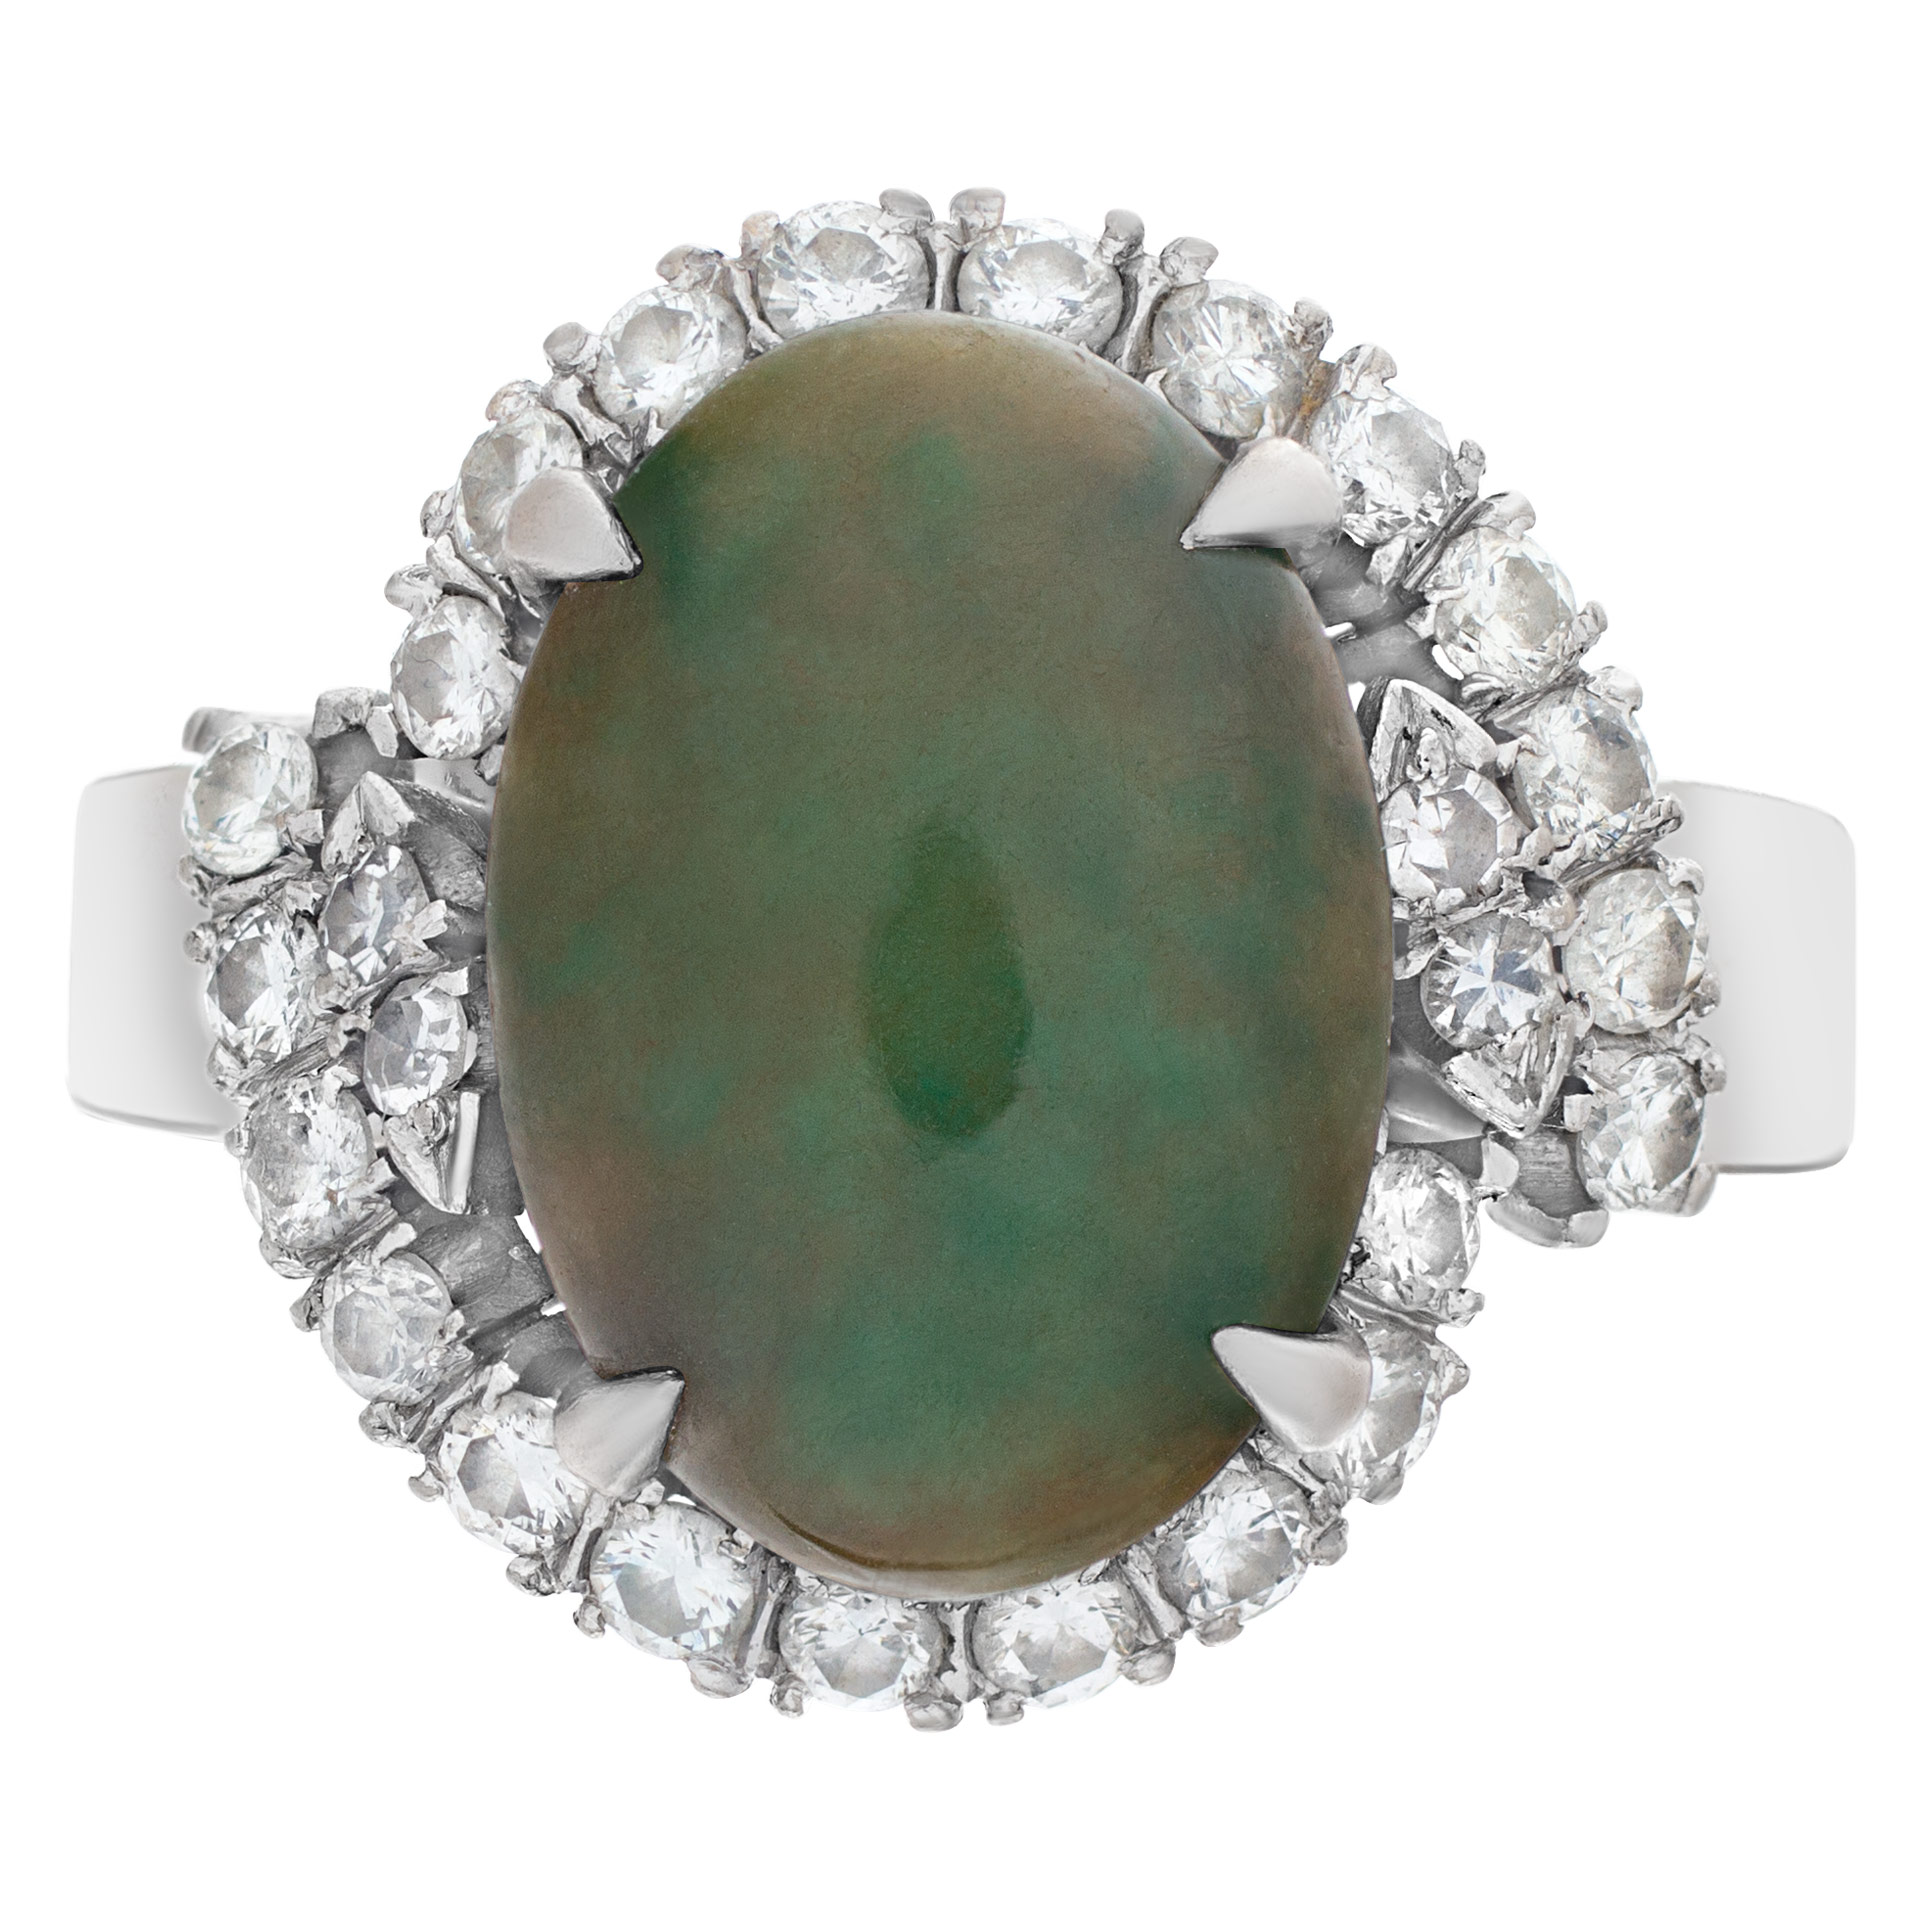 Jade and diamond ring in 14k white gold with approximately .5 cts in diamonds